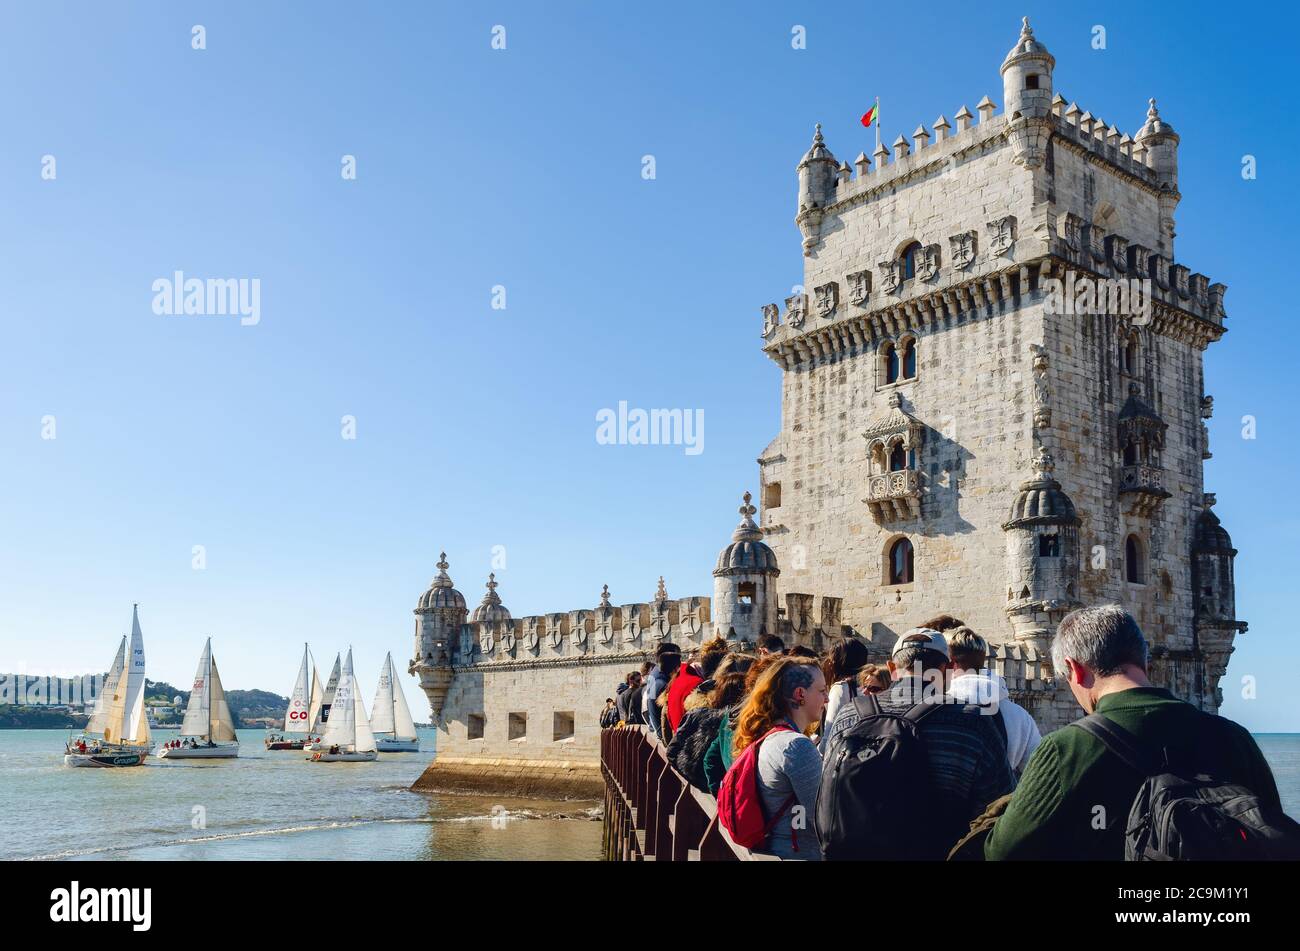 LISBON, PORTUGAL - FEBRUARY 3, 2019: People and tourists waiting queue at the entrance of the Tower of Belem, ancient fortress and symbol of Lisbon, P Stock Photo